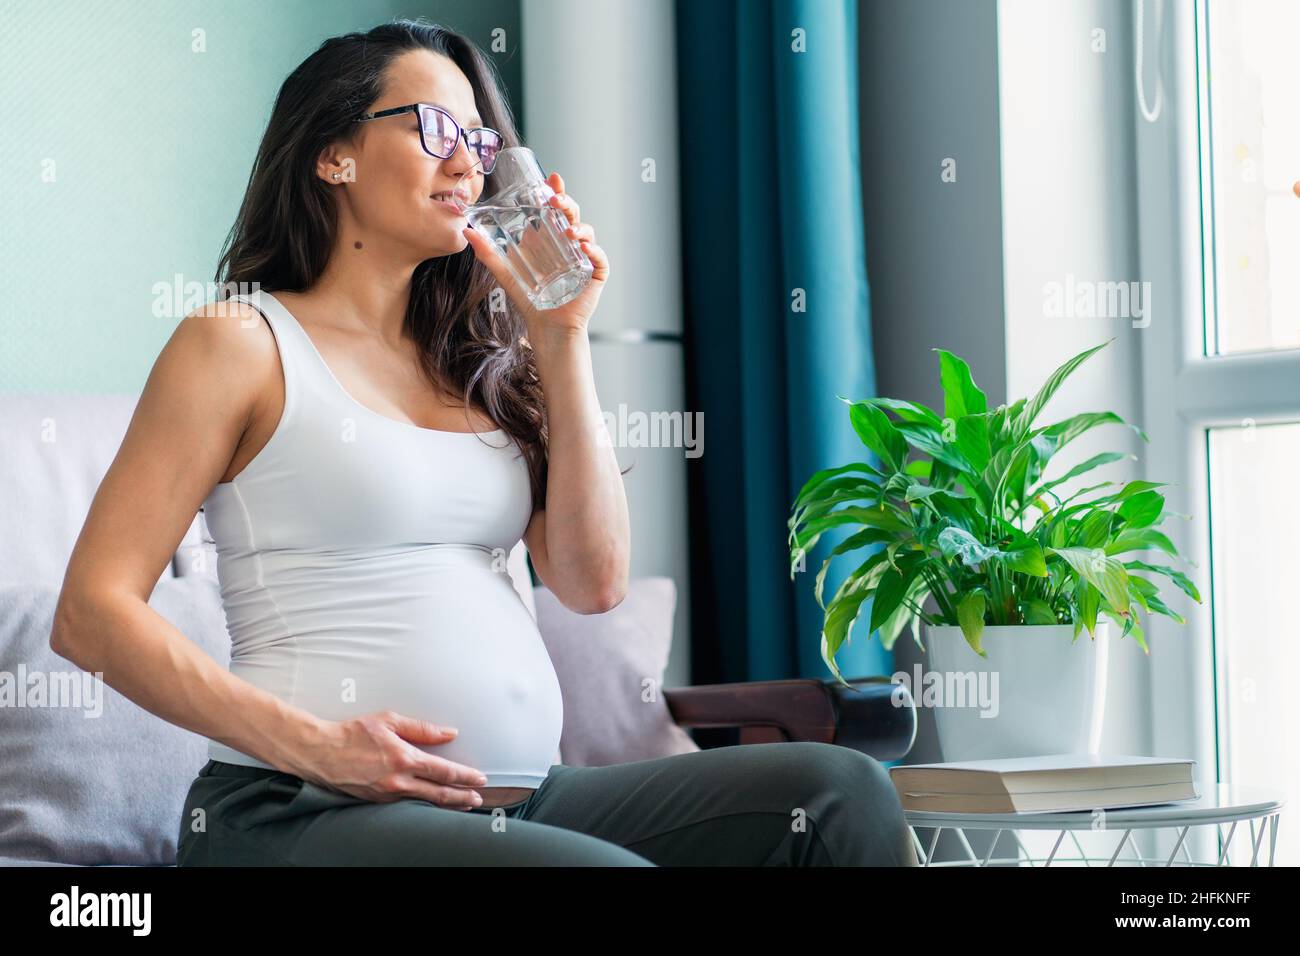 Pregnant woman with glasses sit on sofa caressing belly drinking glass of water Stock Photo